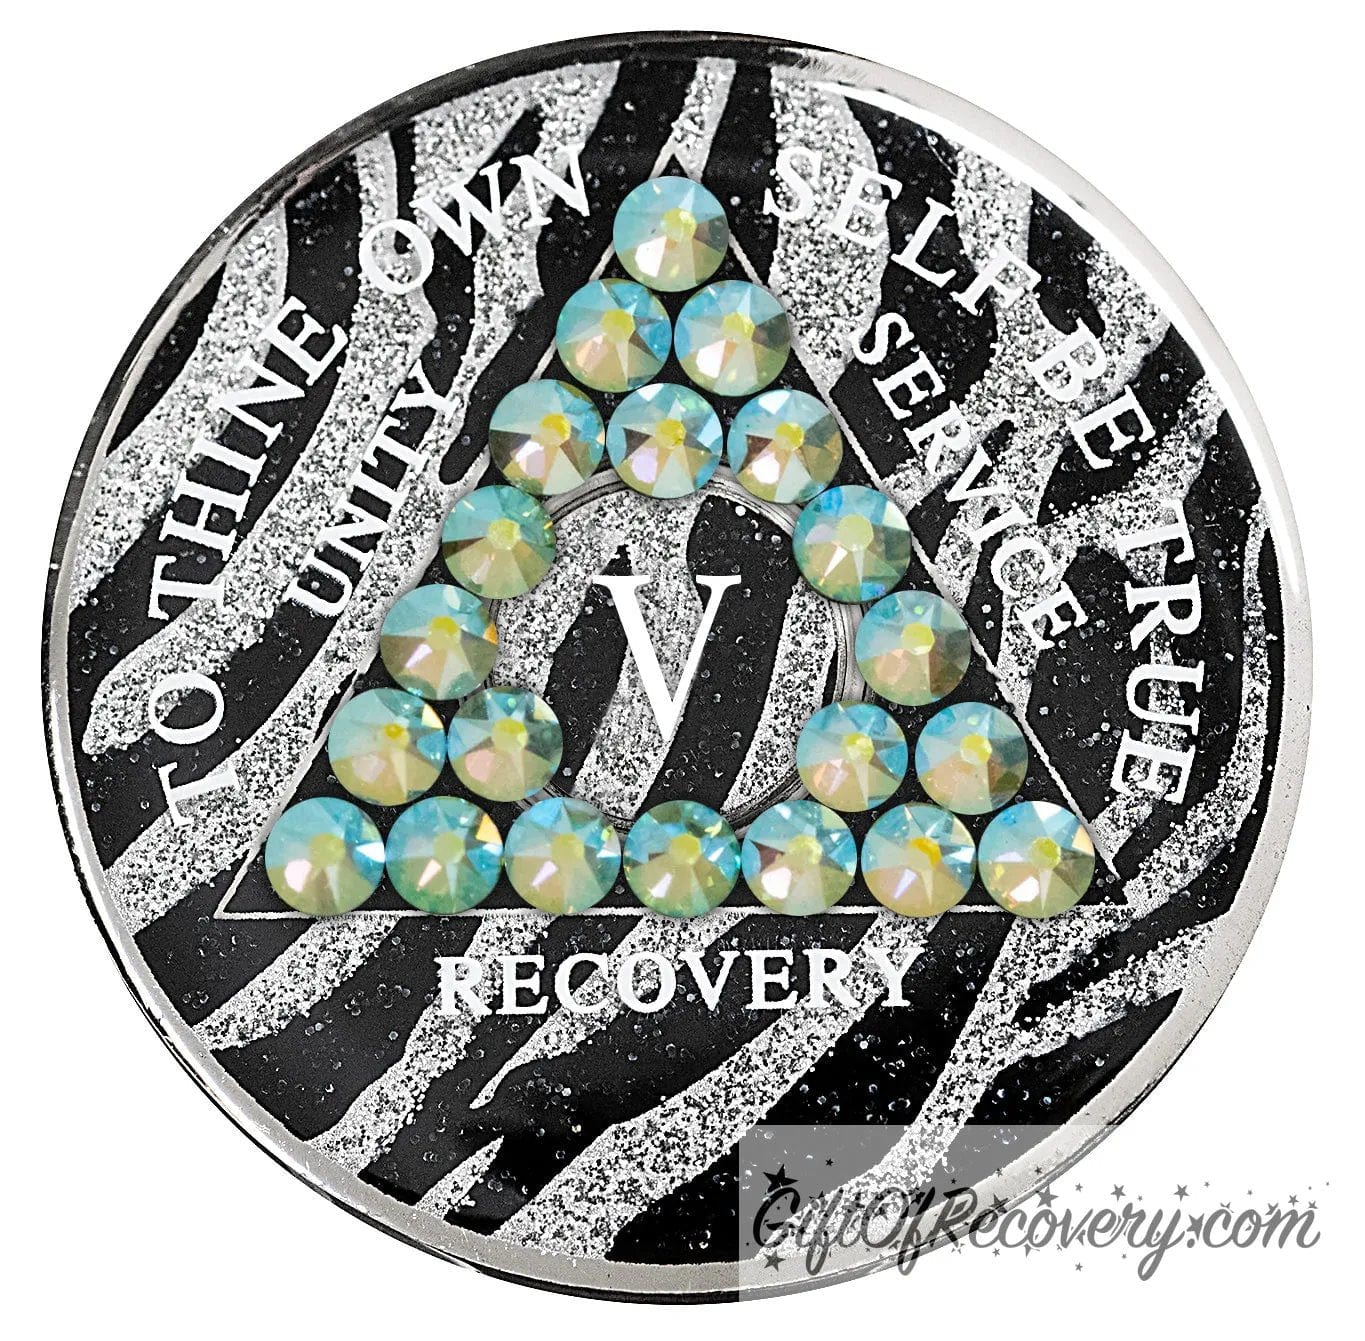 5 year Zebra glitter style AA medallion with 21 genuine peridot crystals, AA moto, unity, service, recovery, and roman numeral are in white and blend into the pattern, so you can let your recovery shine, not your time, the outer rim is silver plated, sealed in a high-quality, chip and scratch-resistant resin dome giving it a beautiful glossy look that will last.